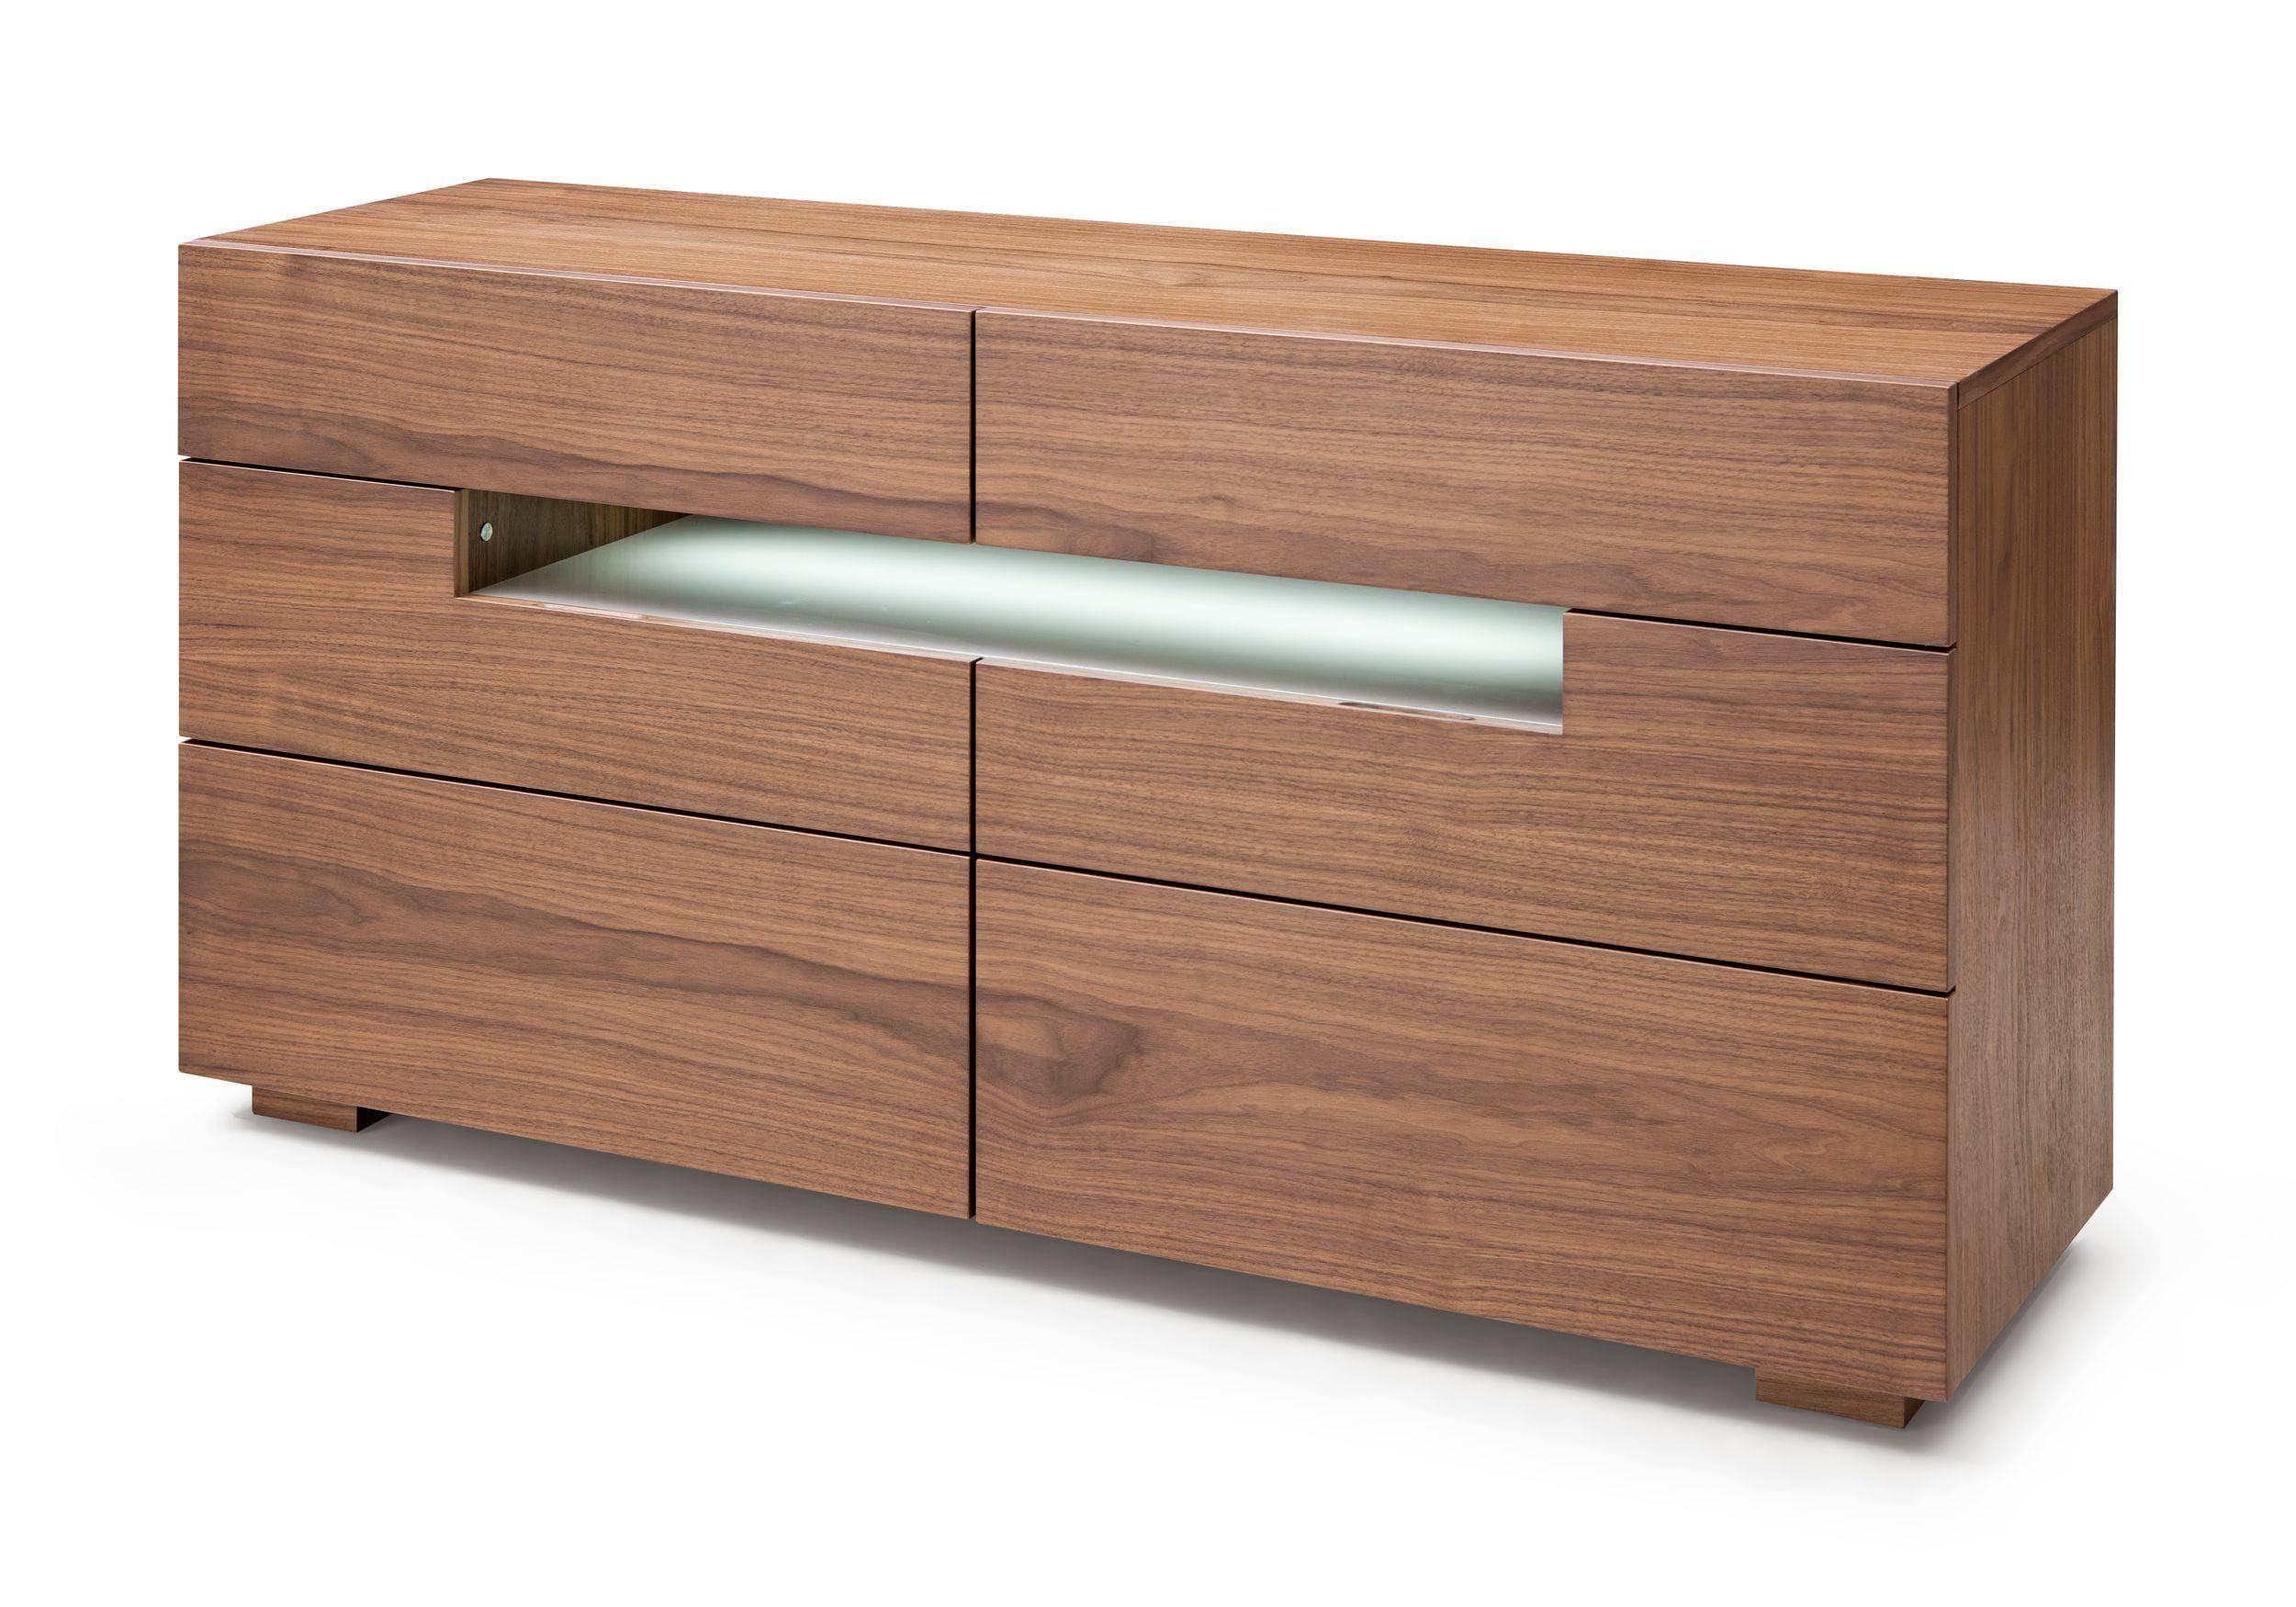 Contemporary, Modern Dresser VGWCCG05D-WAL-DRS VGWCCG05D-WAL-DRS in Walnut 